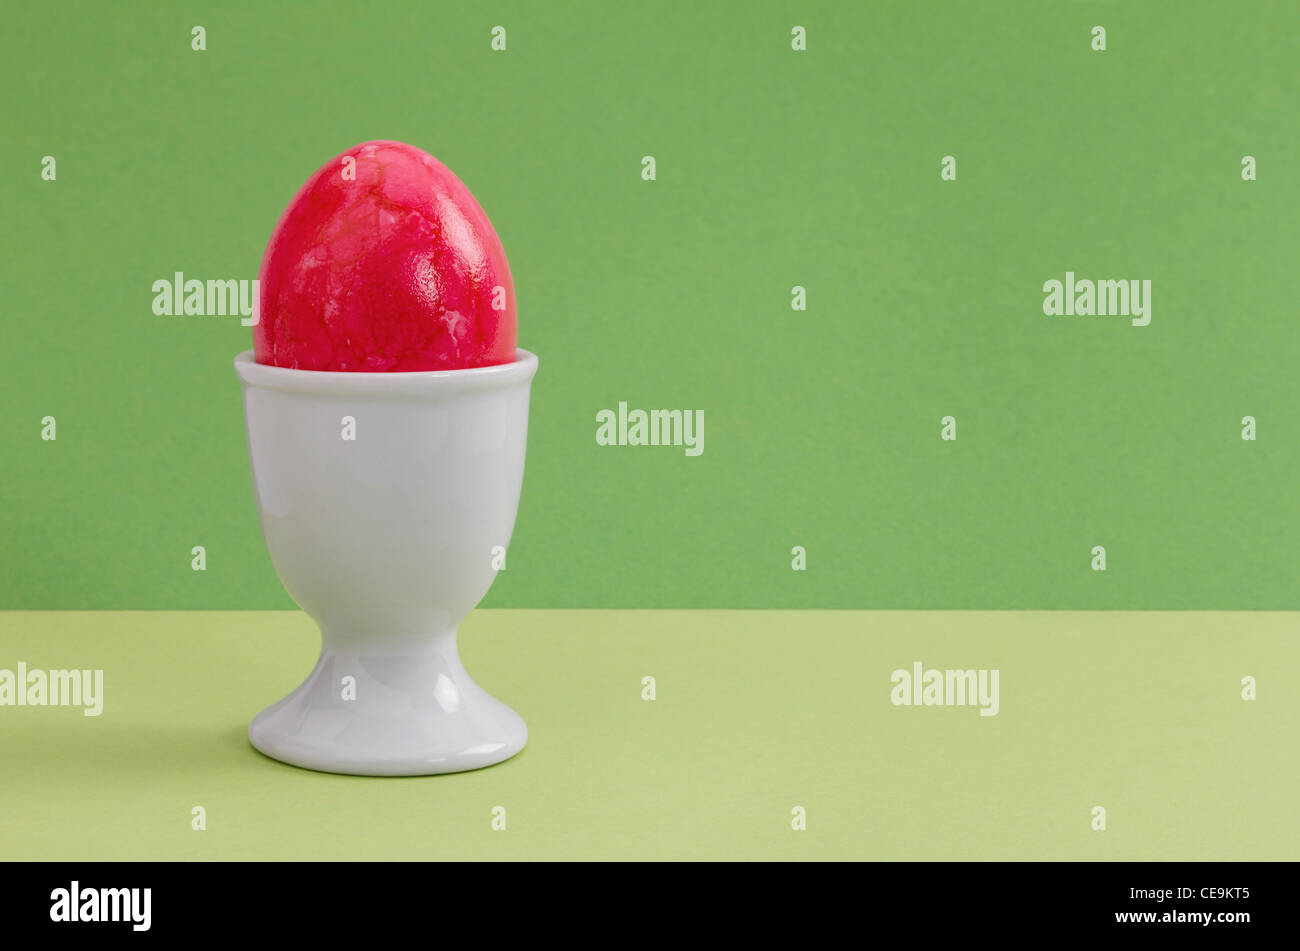 Red Easter egg in a white egg cup against a green background - studio shot with copy space Stock Photo